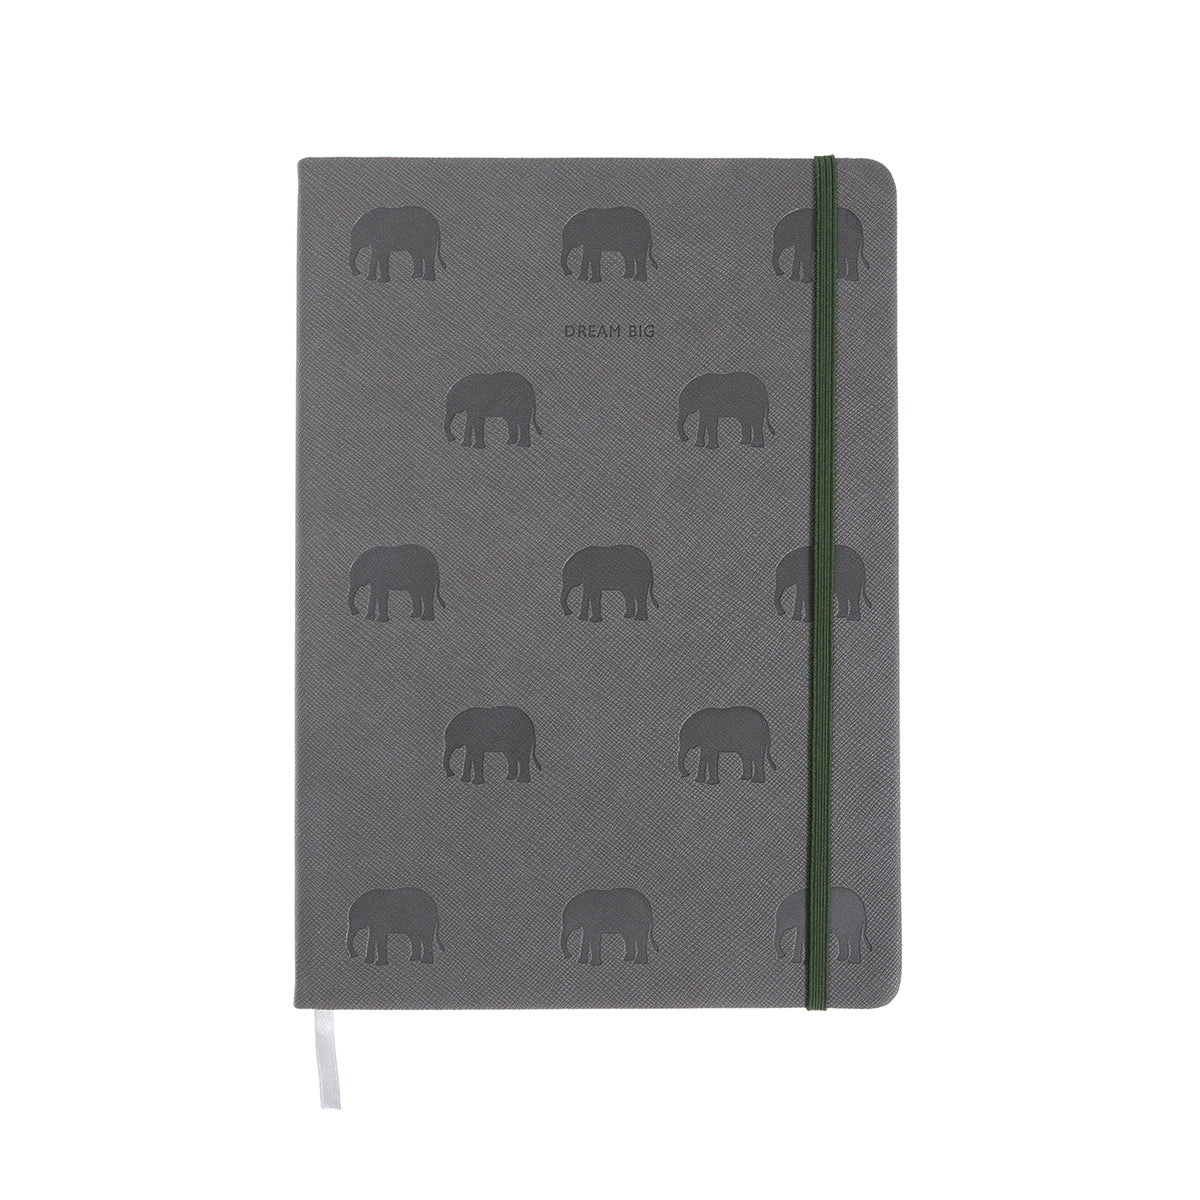 Baby Elephant and Duck, Notebook Blank Journal